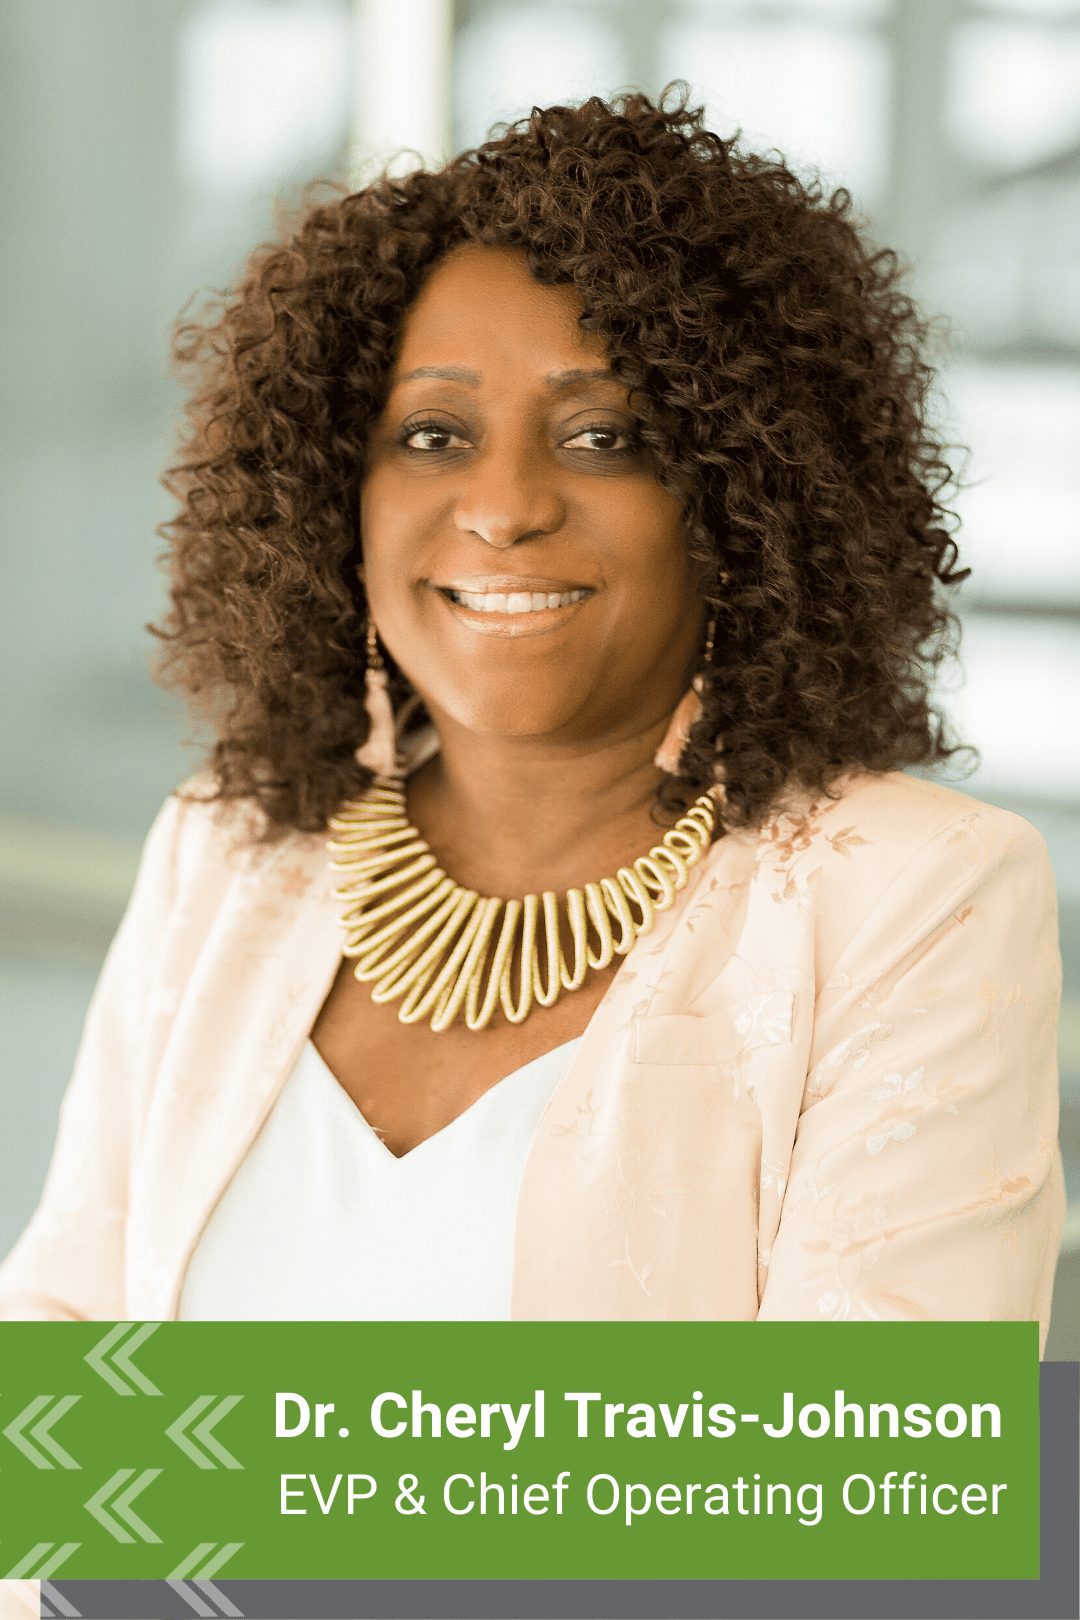 Cheryl Travis-Johnson, EVP & Chief Operating Officer | Our Leaders